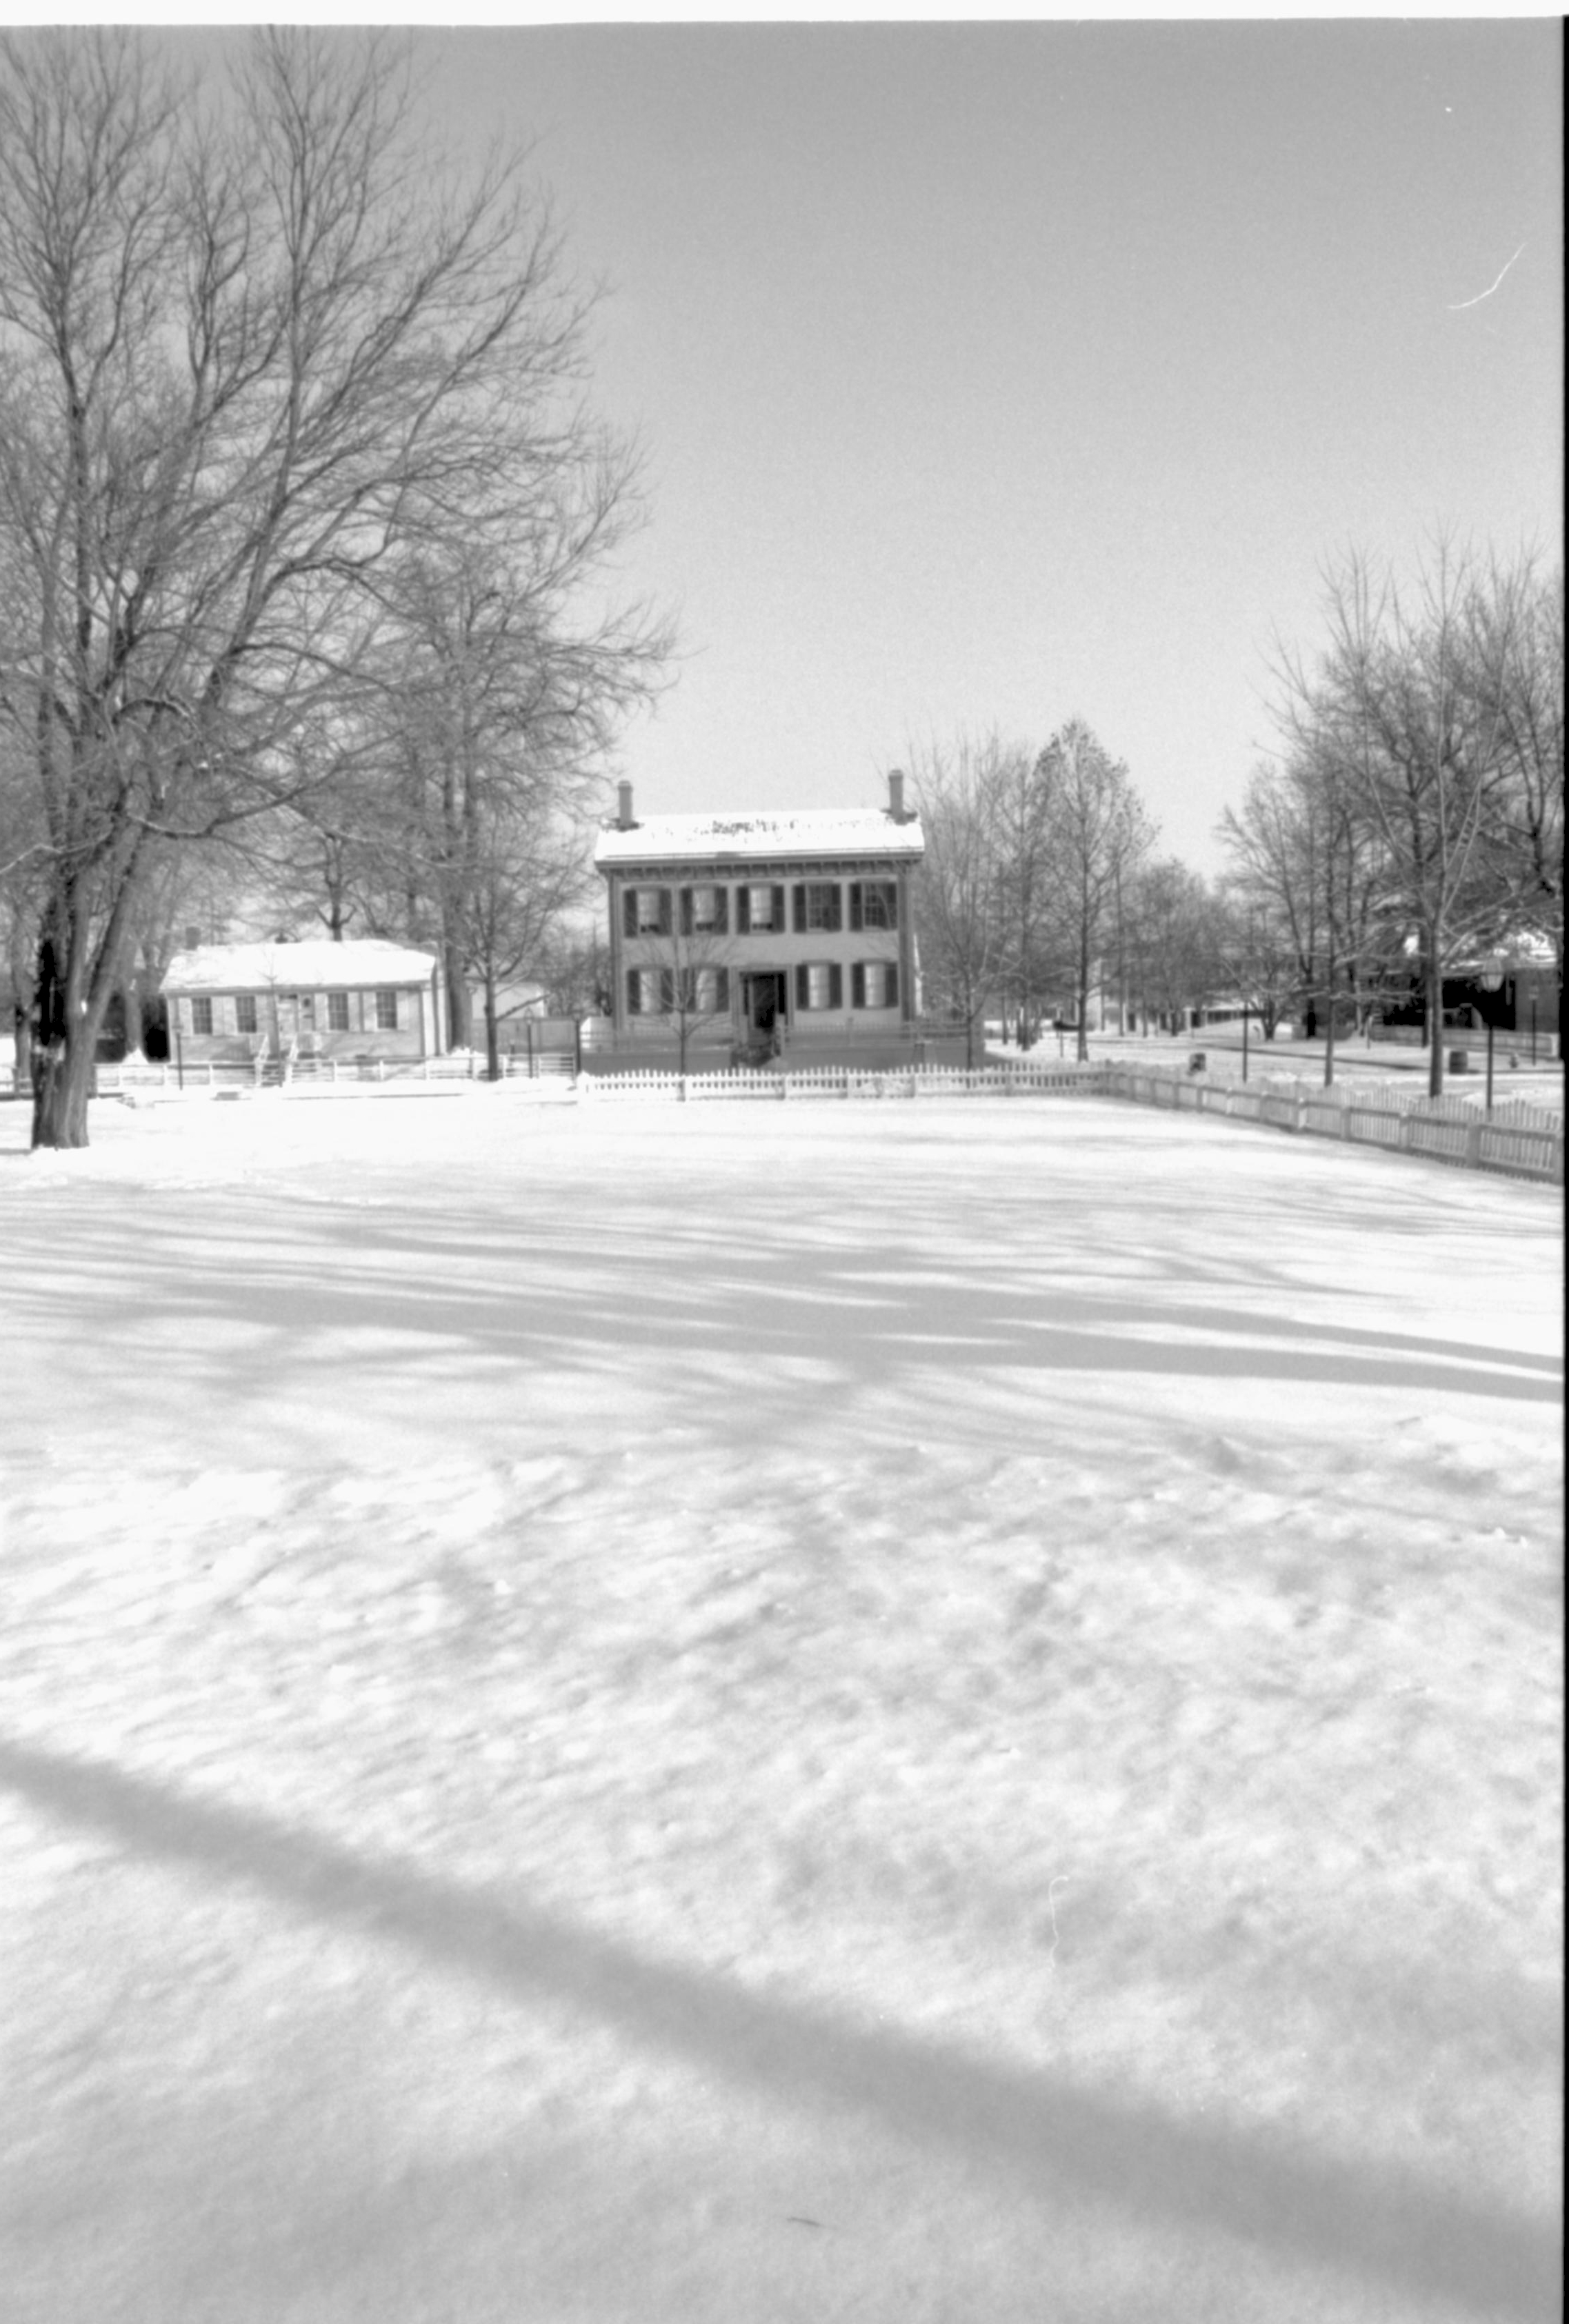 Lincoln neighborhood in snow.  Lincoln Home in center, Corneau House on left, Arnold House on right, Burch lot in foreground Looking East from alley behind Visitor Center over the Burch Lot, Block 7, Lot 9 snow, Lincoln Home, Corneau, Arnold, Burch Lot